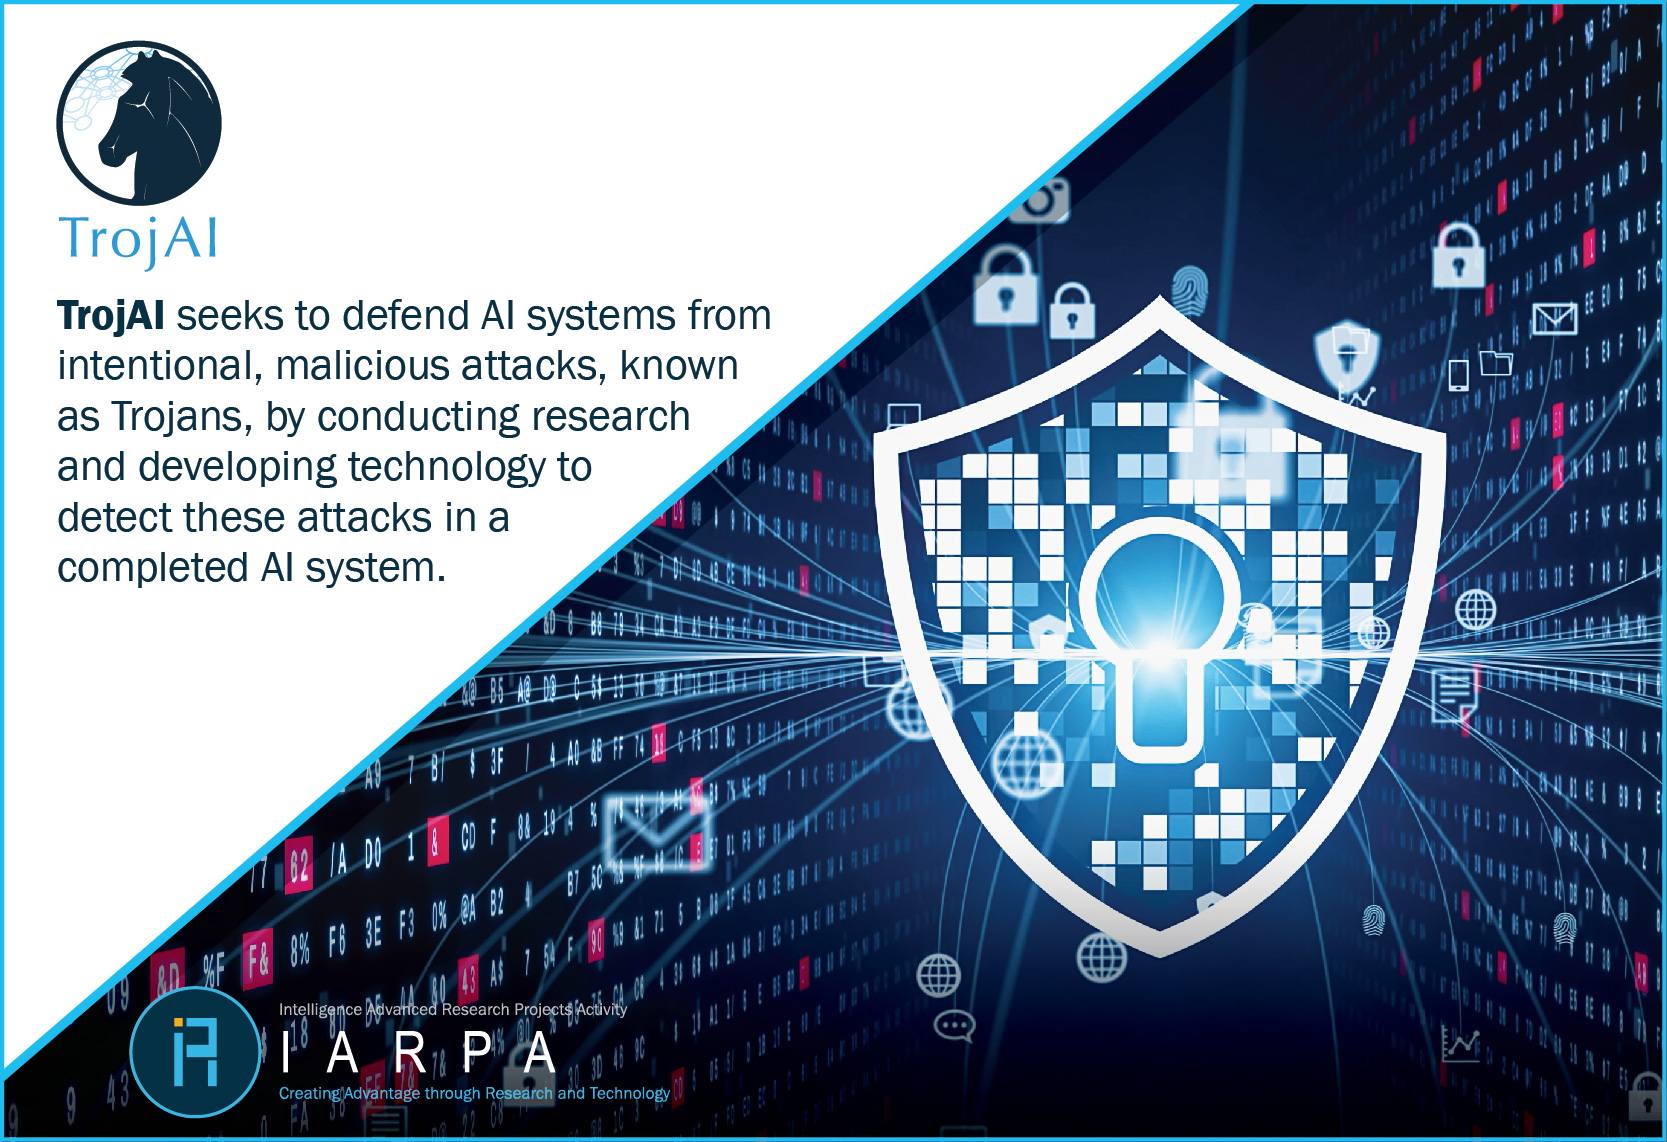 IARPA - Research and Technology Protection